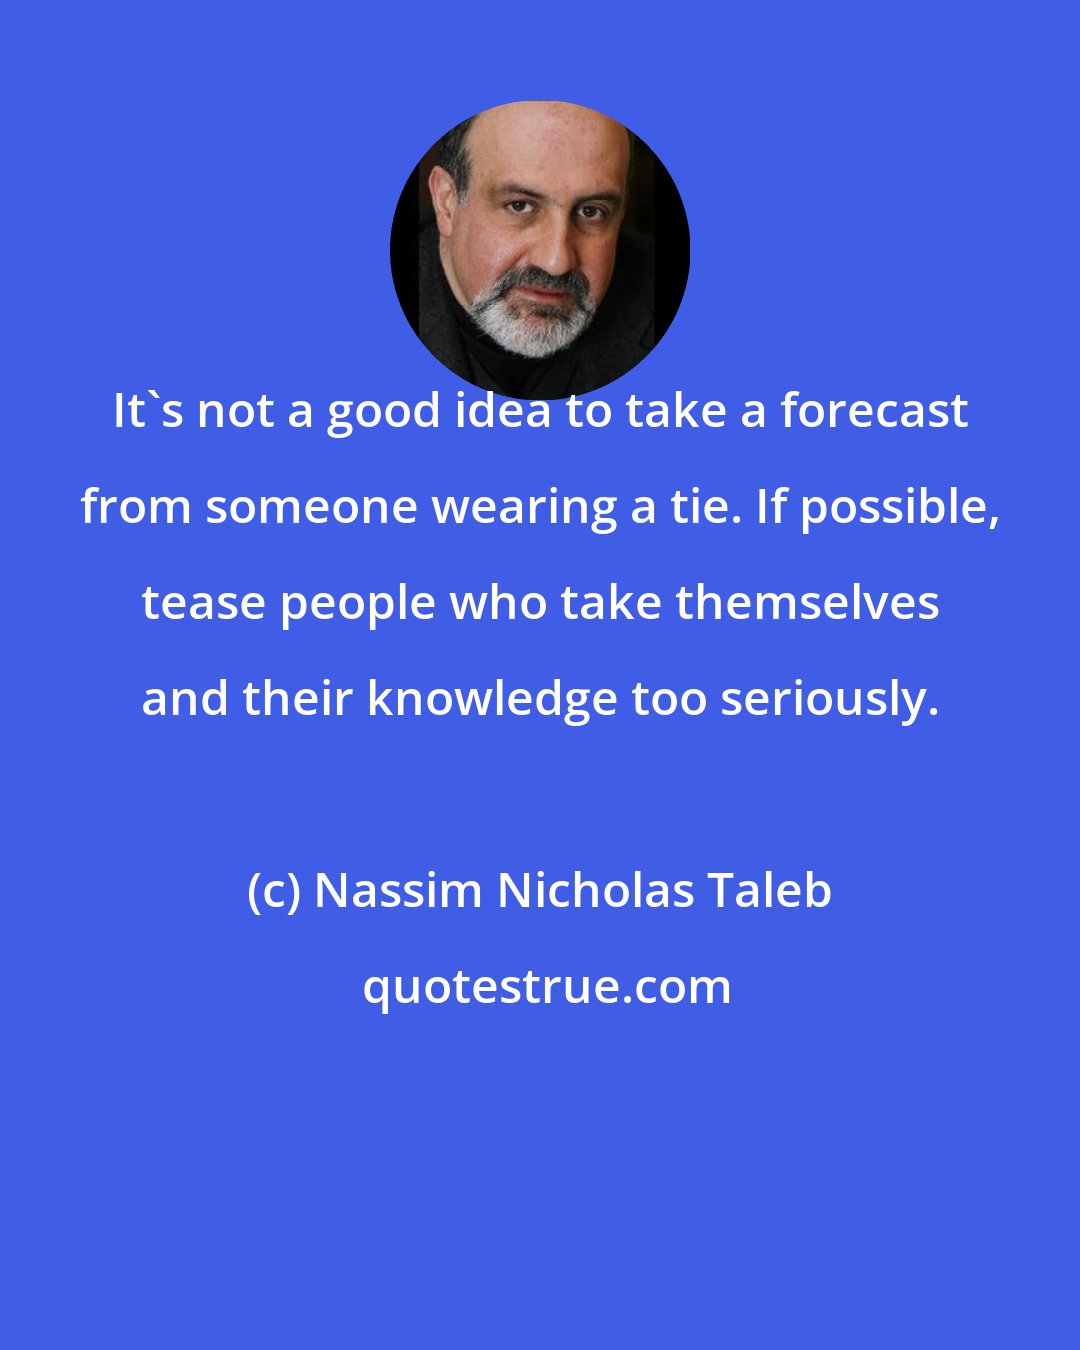 Nassim Nicholas Taleb: It's not a good idea to take a forecast from someone wearing a tie. If possible, tease people who take themselves and their knowledge too seriously.